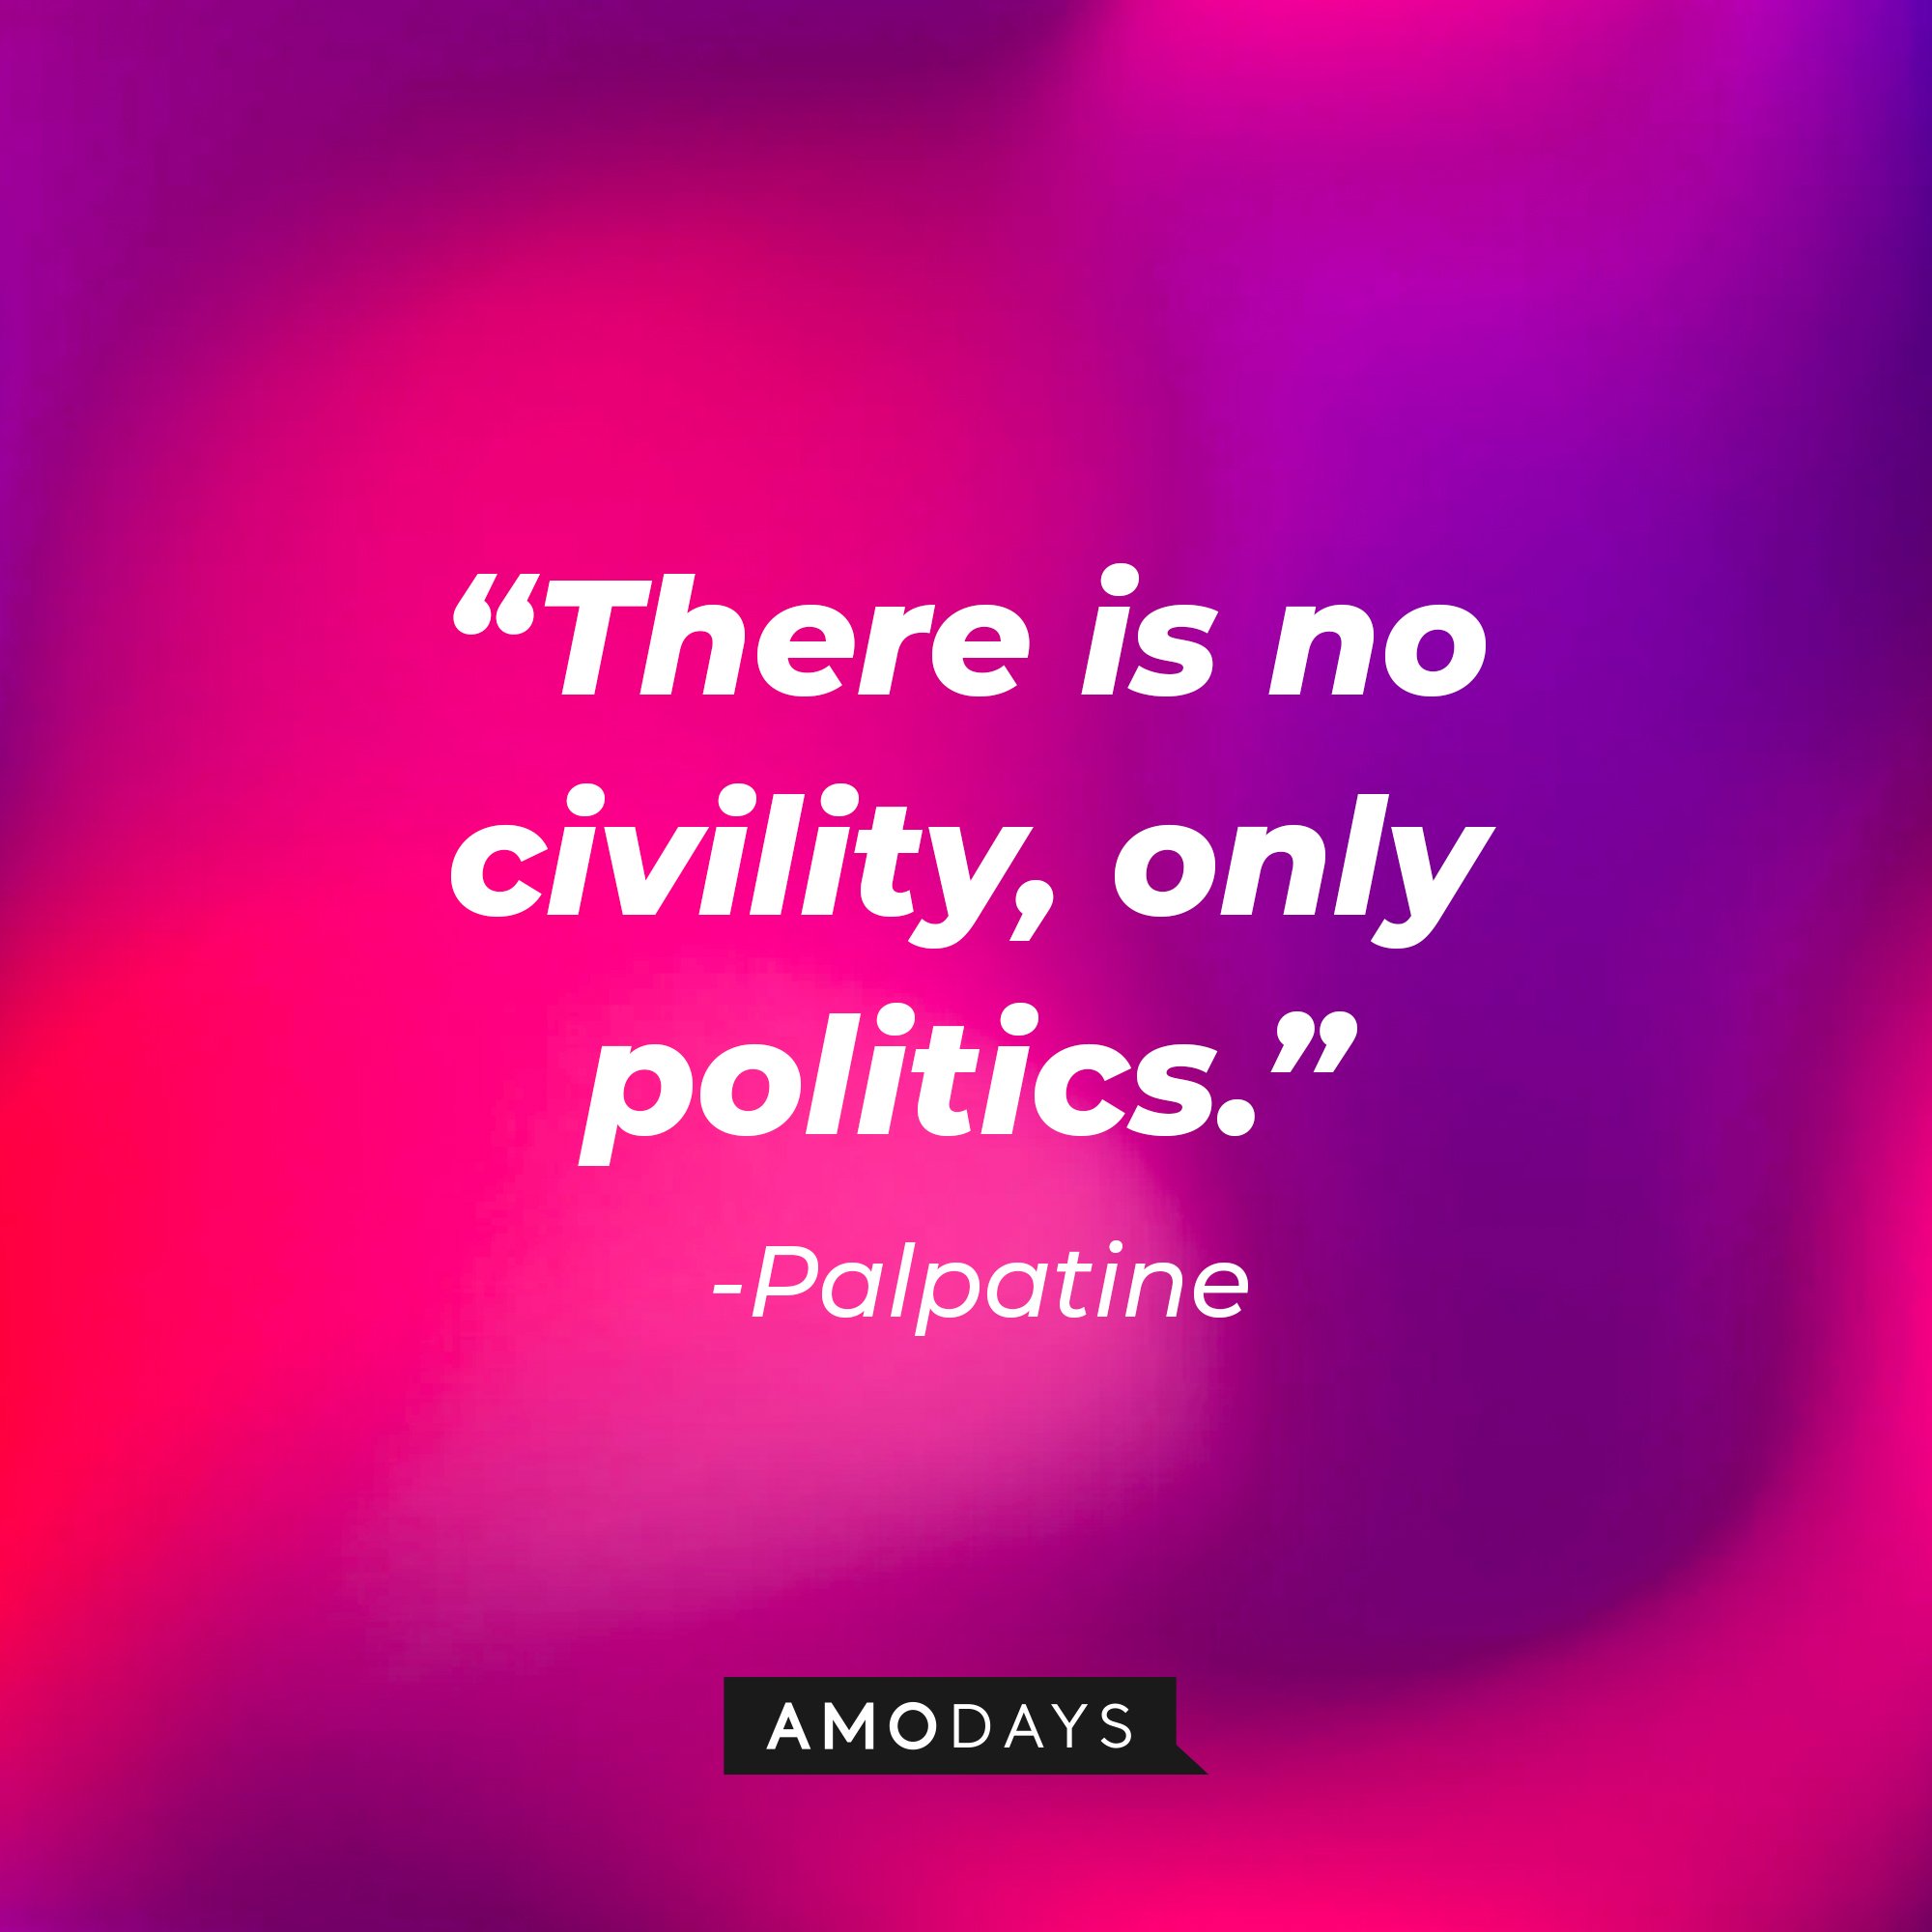 Palpatine's quote: “There is no civility, only politics.” | Image: AmoDays